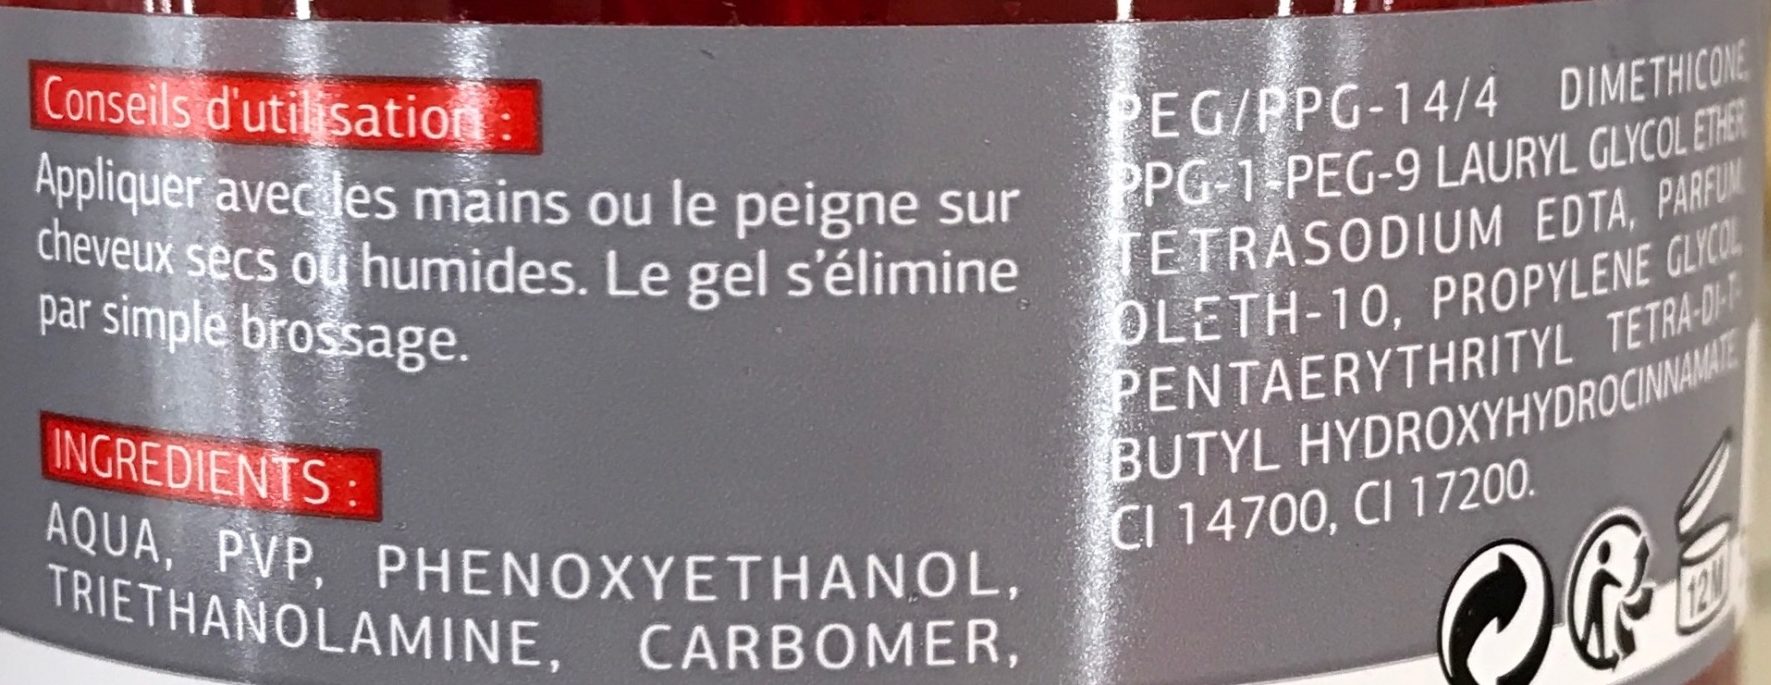 Gel coiffant fixation extra forte - Ingredients - fr